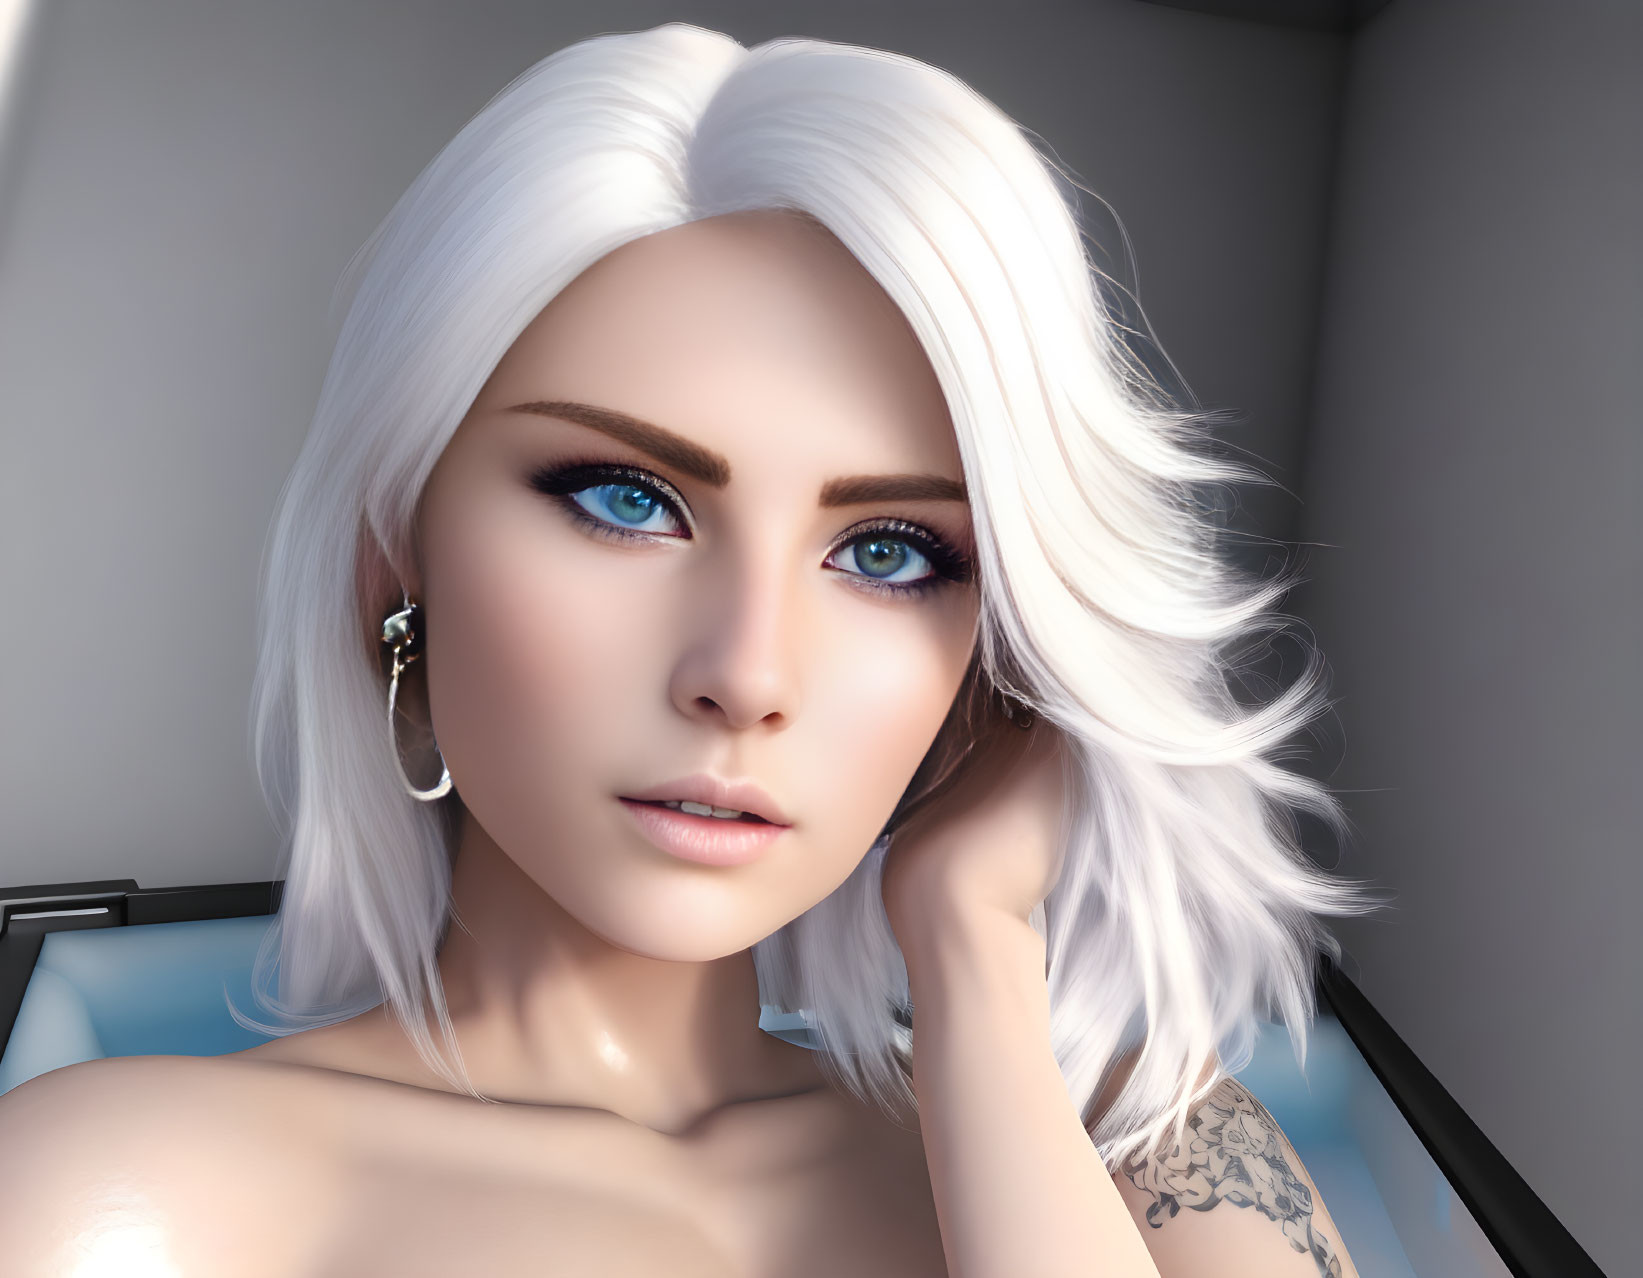 3D rendered image of woman with short white hair and blue eyes